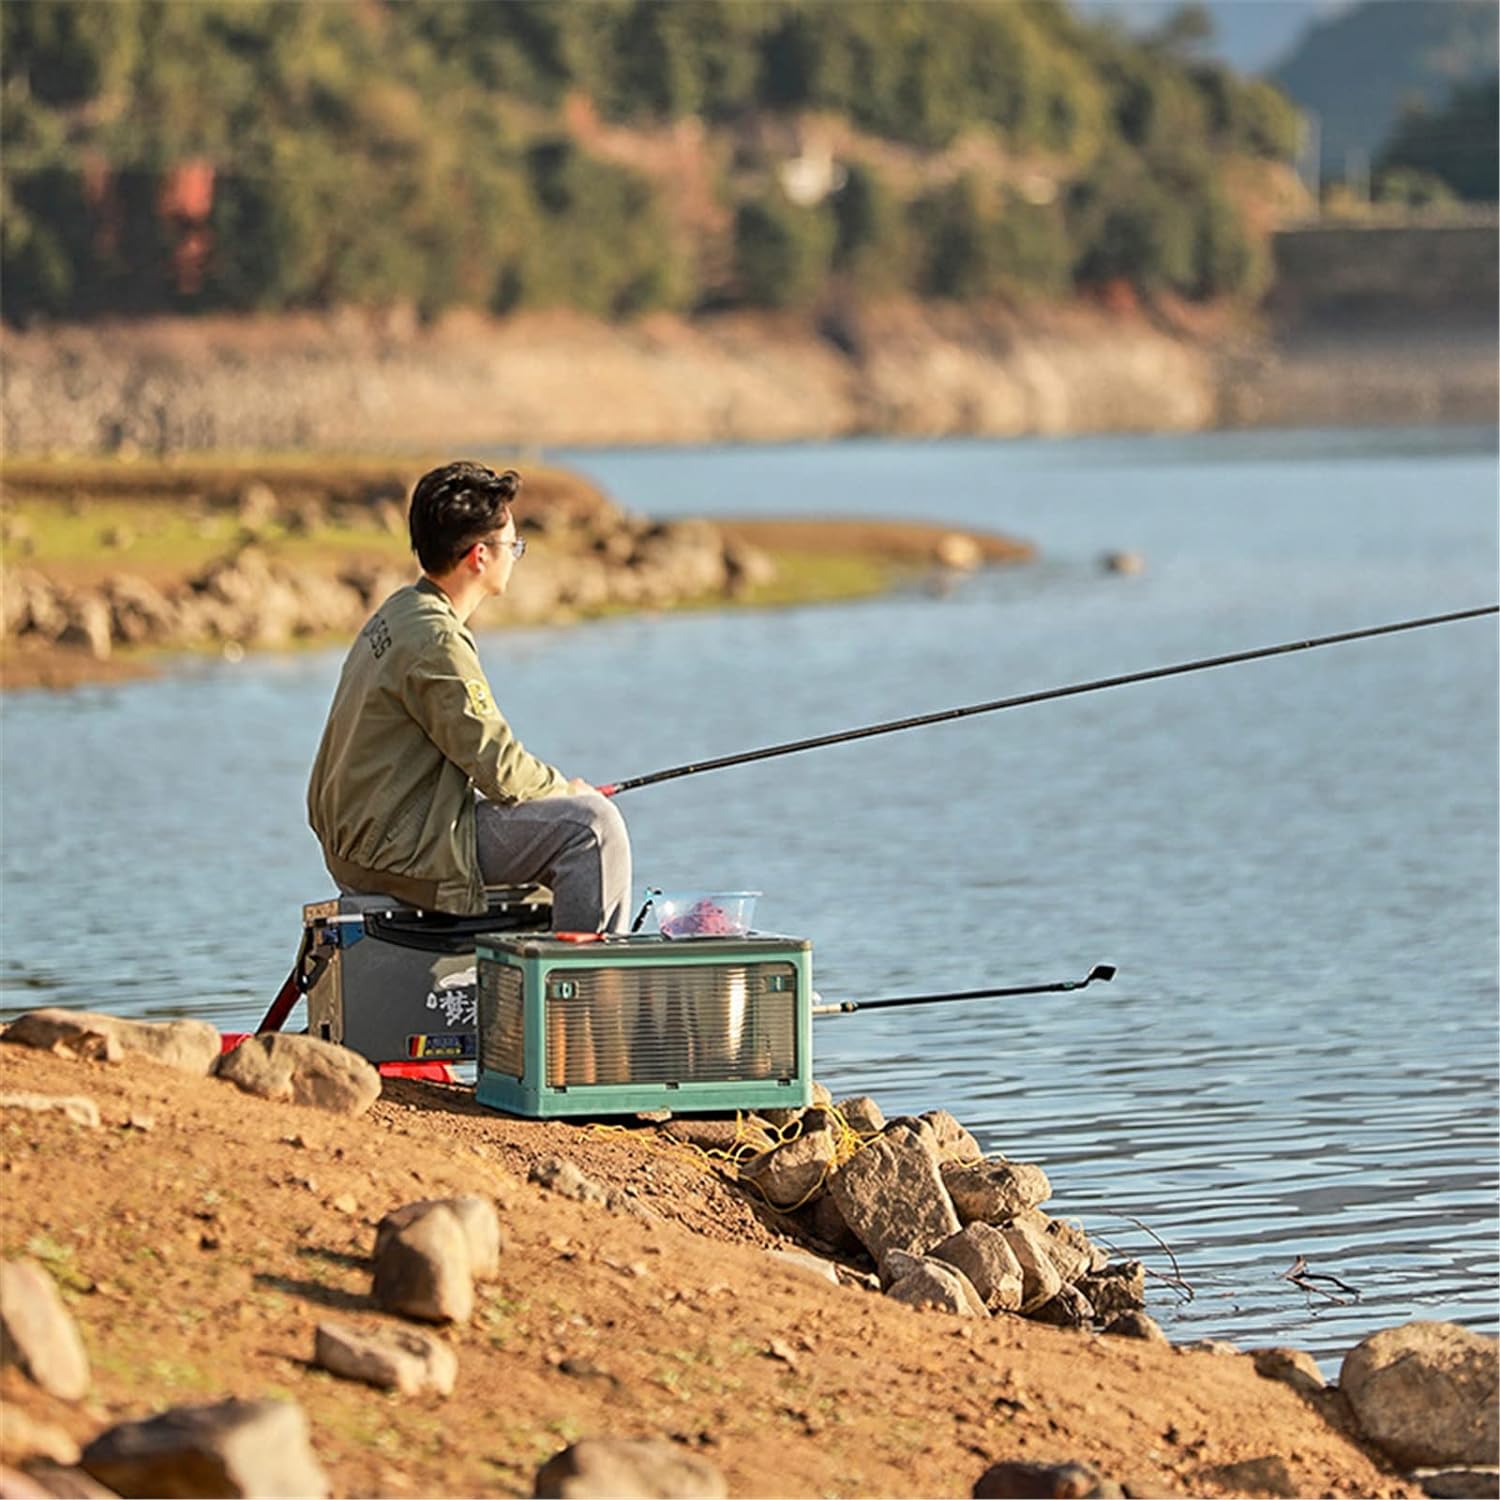 A person uses Foldable Transparent Storage Box with Wheels while fishing 